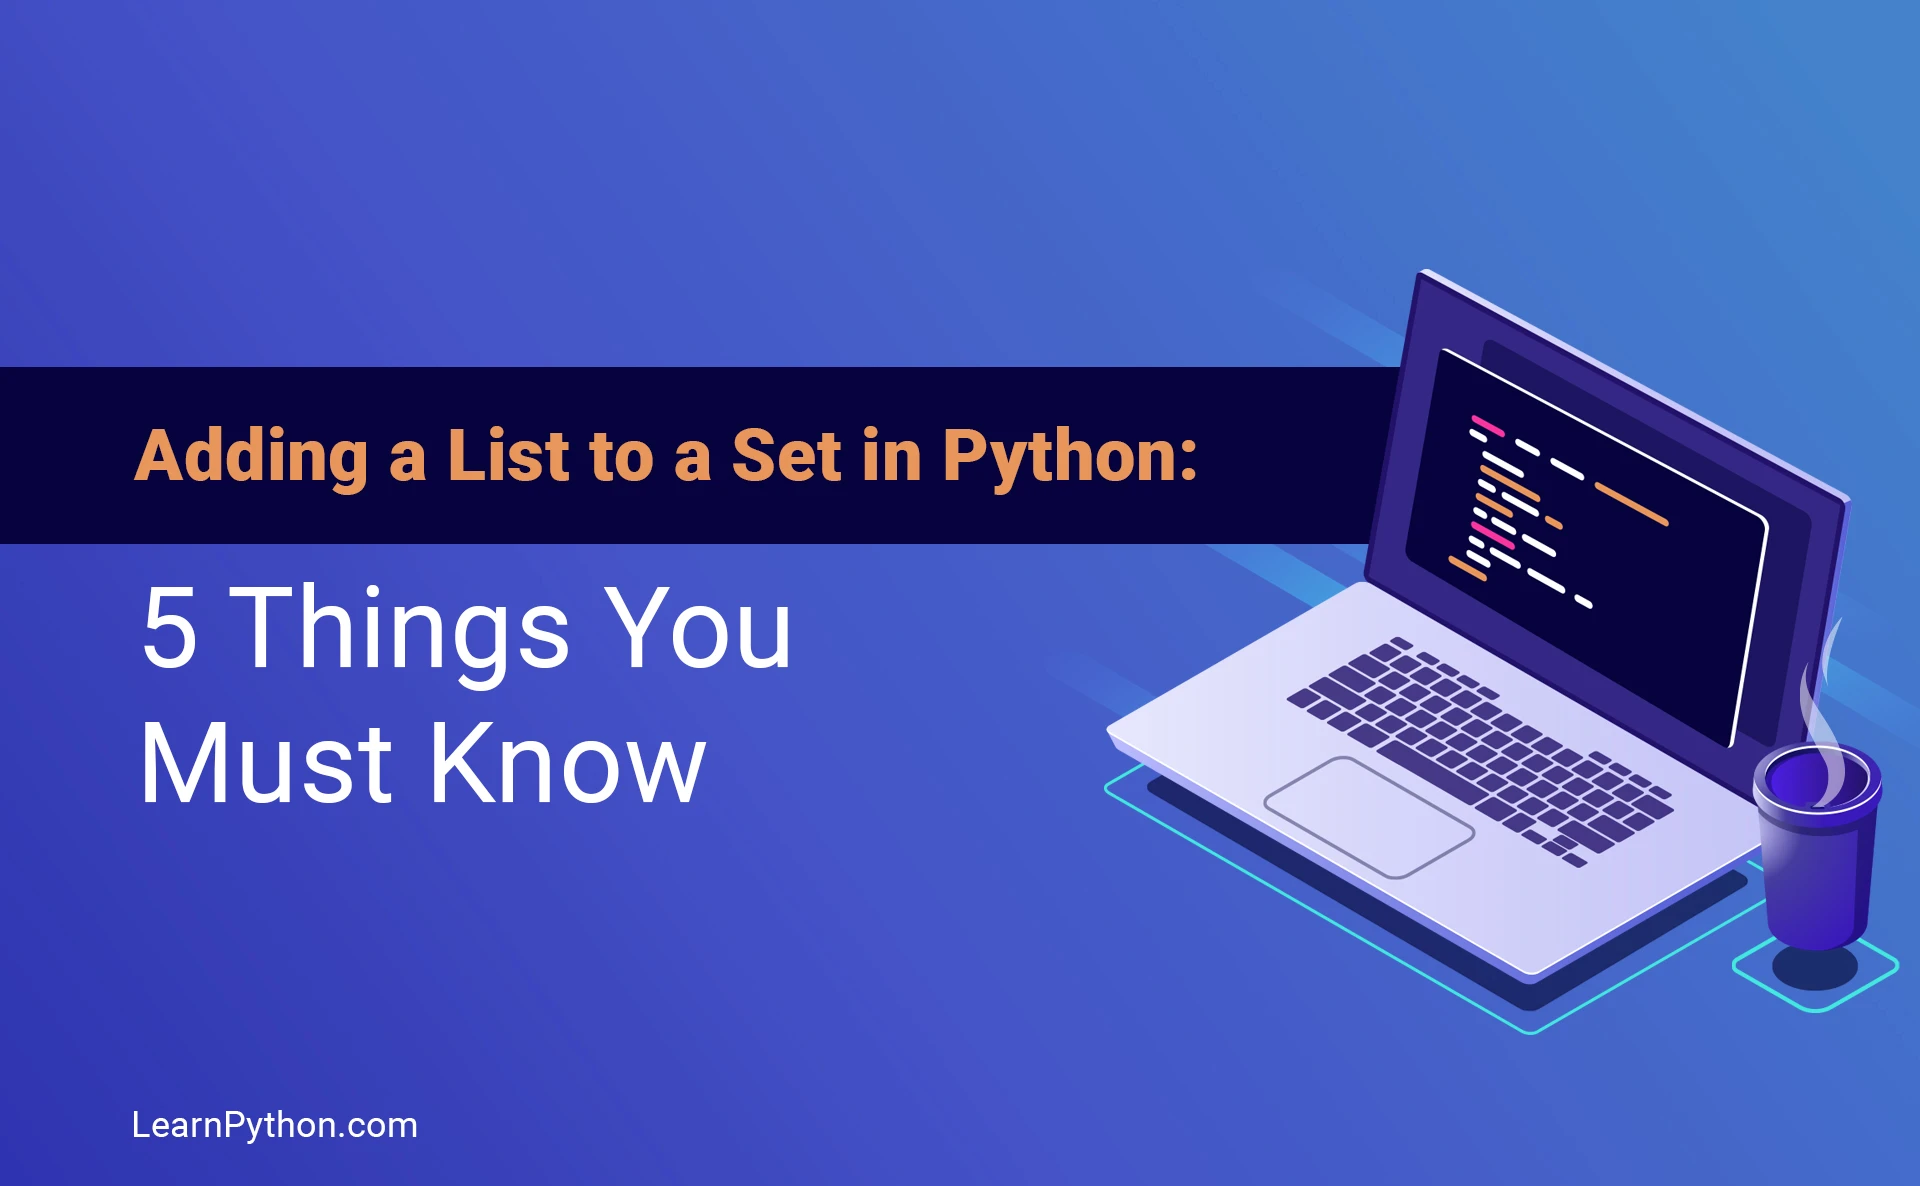 Adding a List to a Set in Python: 5 Things You Must Know